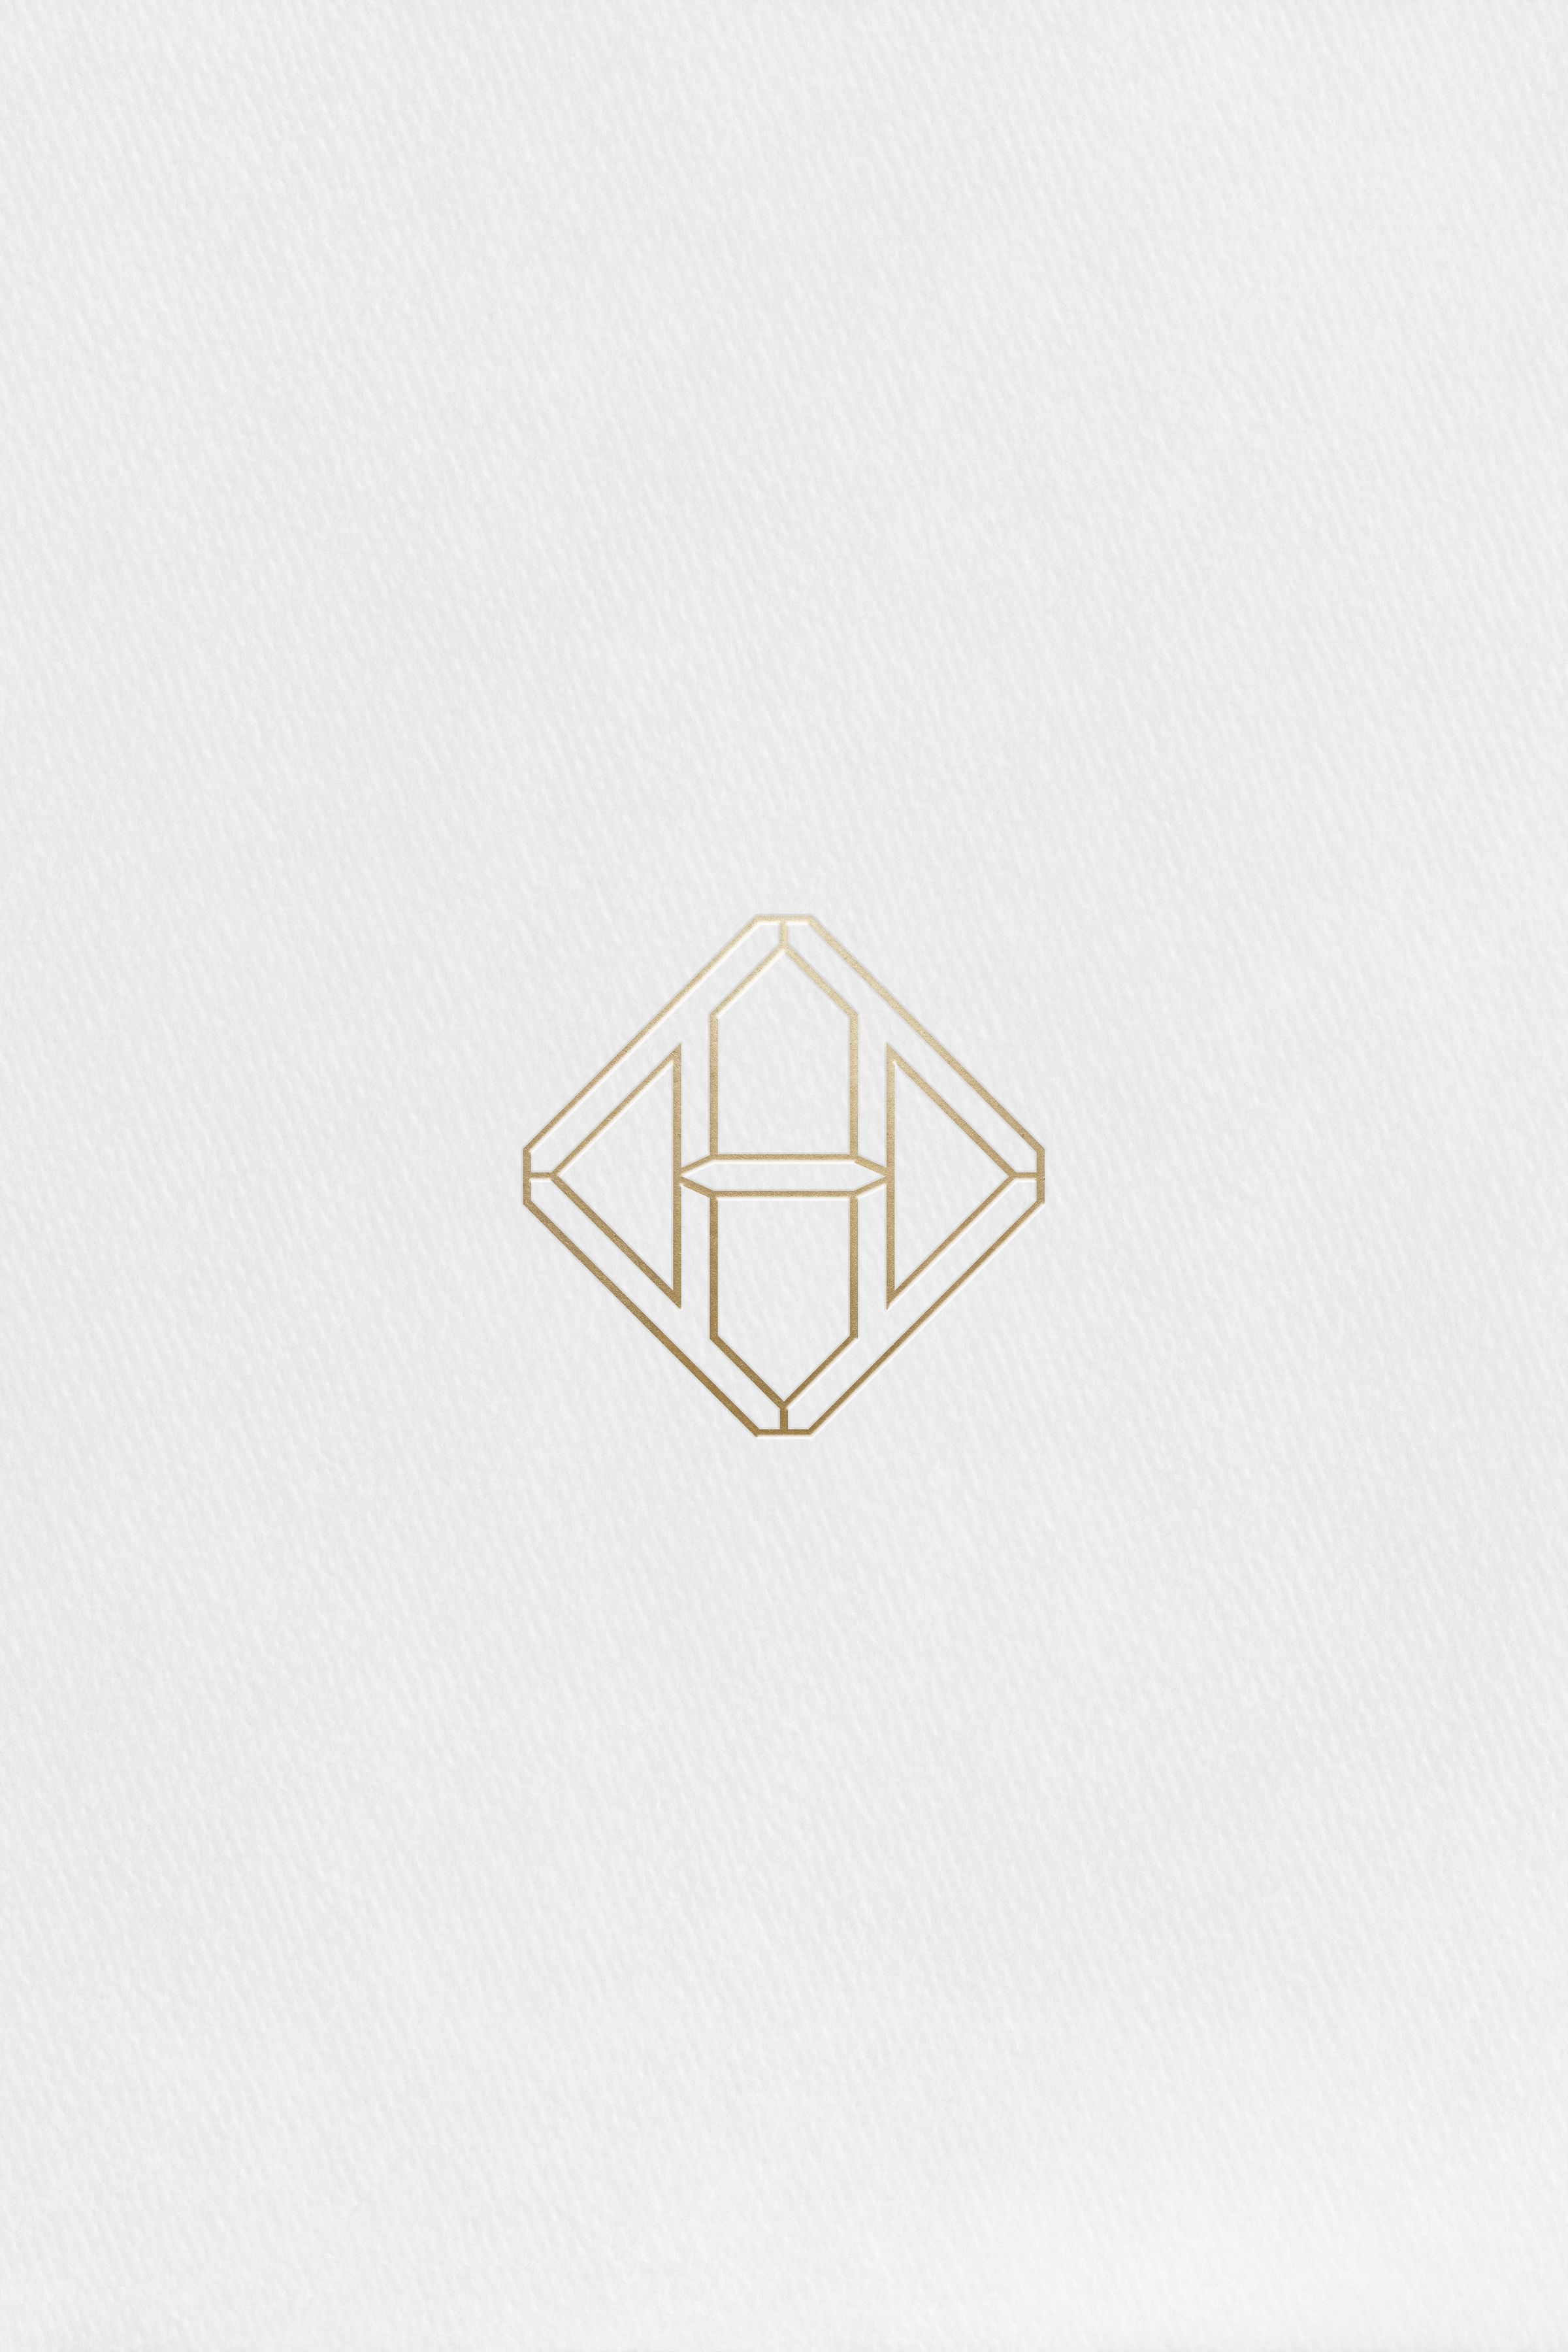 Hennessy H mark applied in gold foil to paper